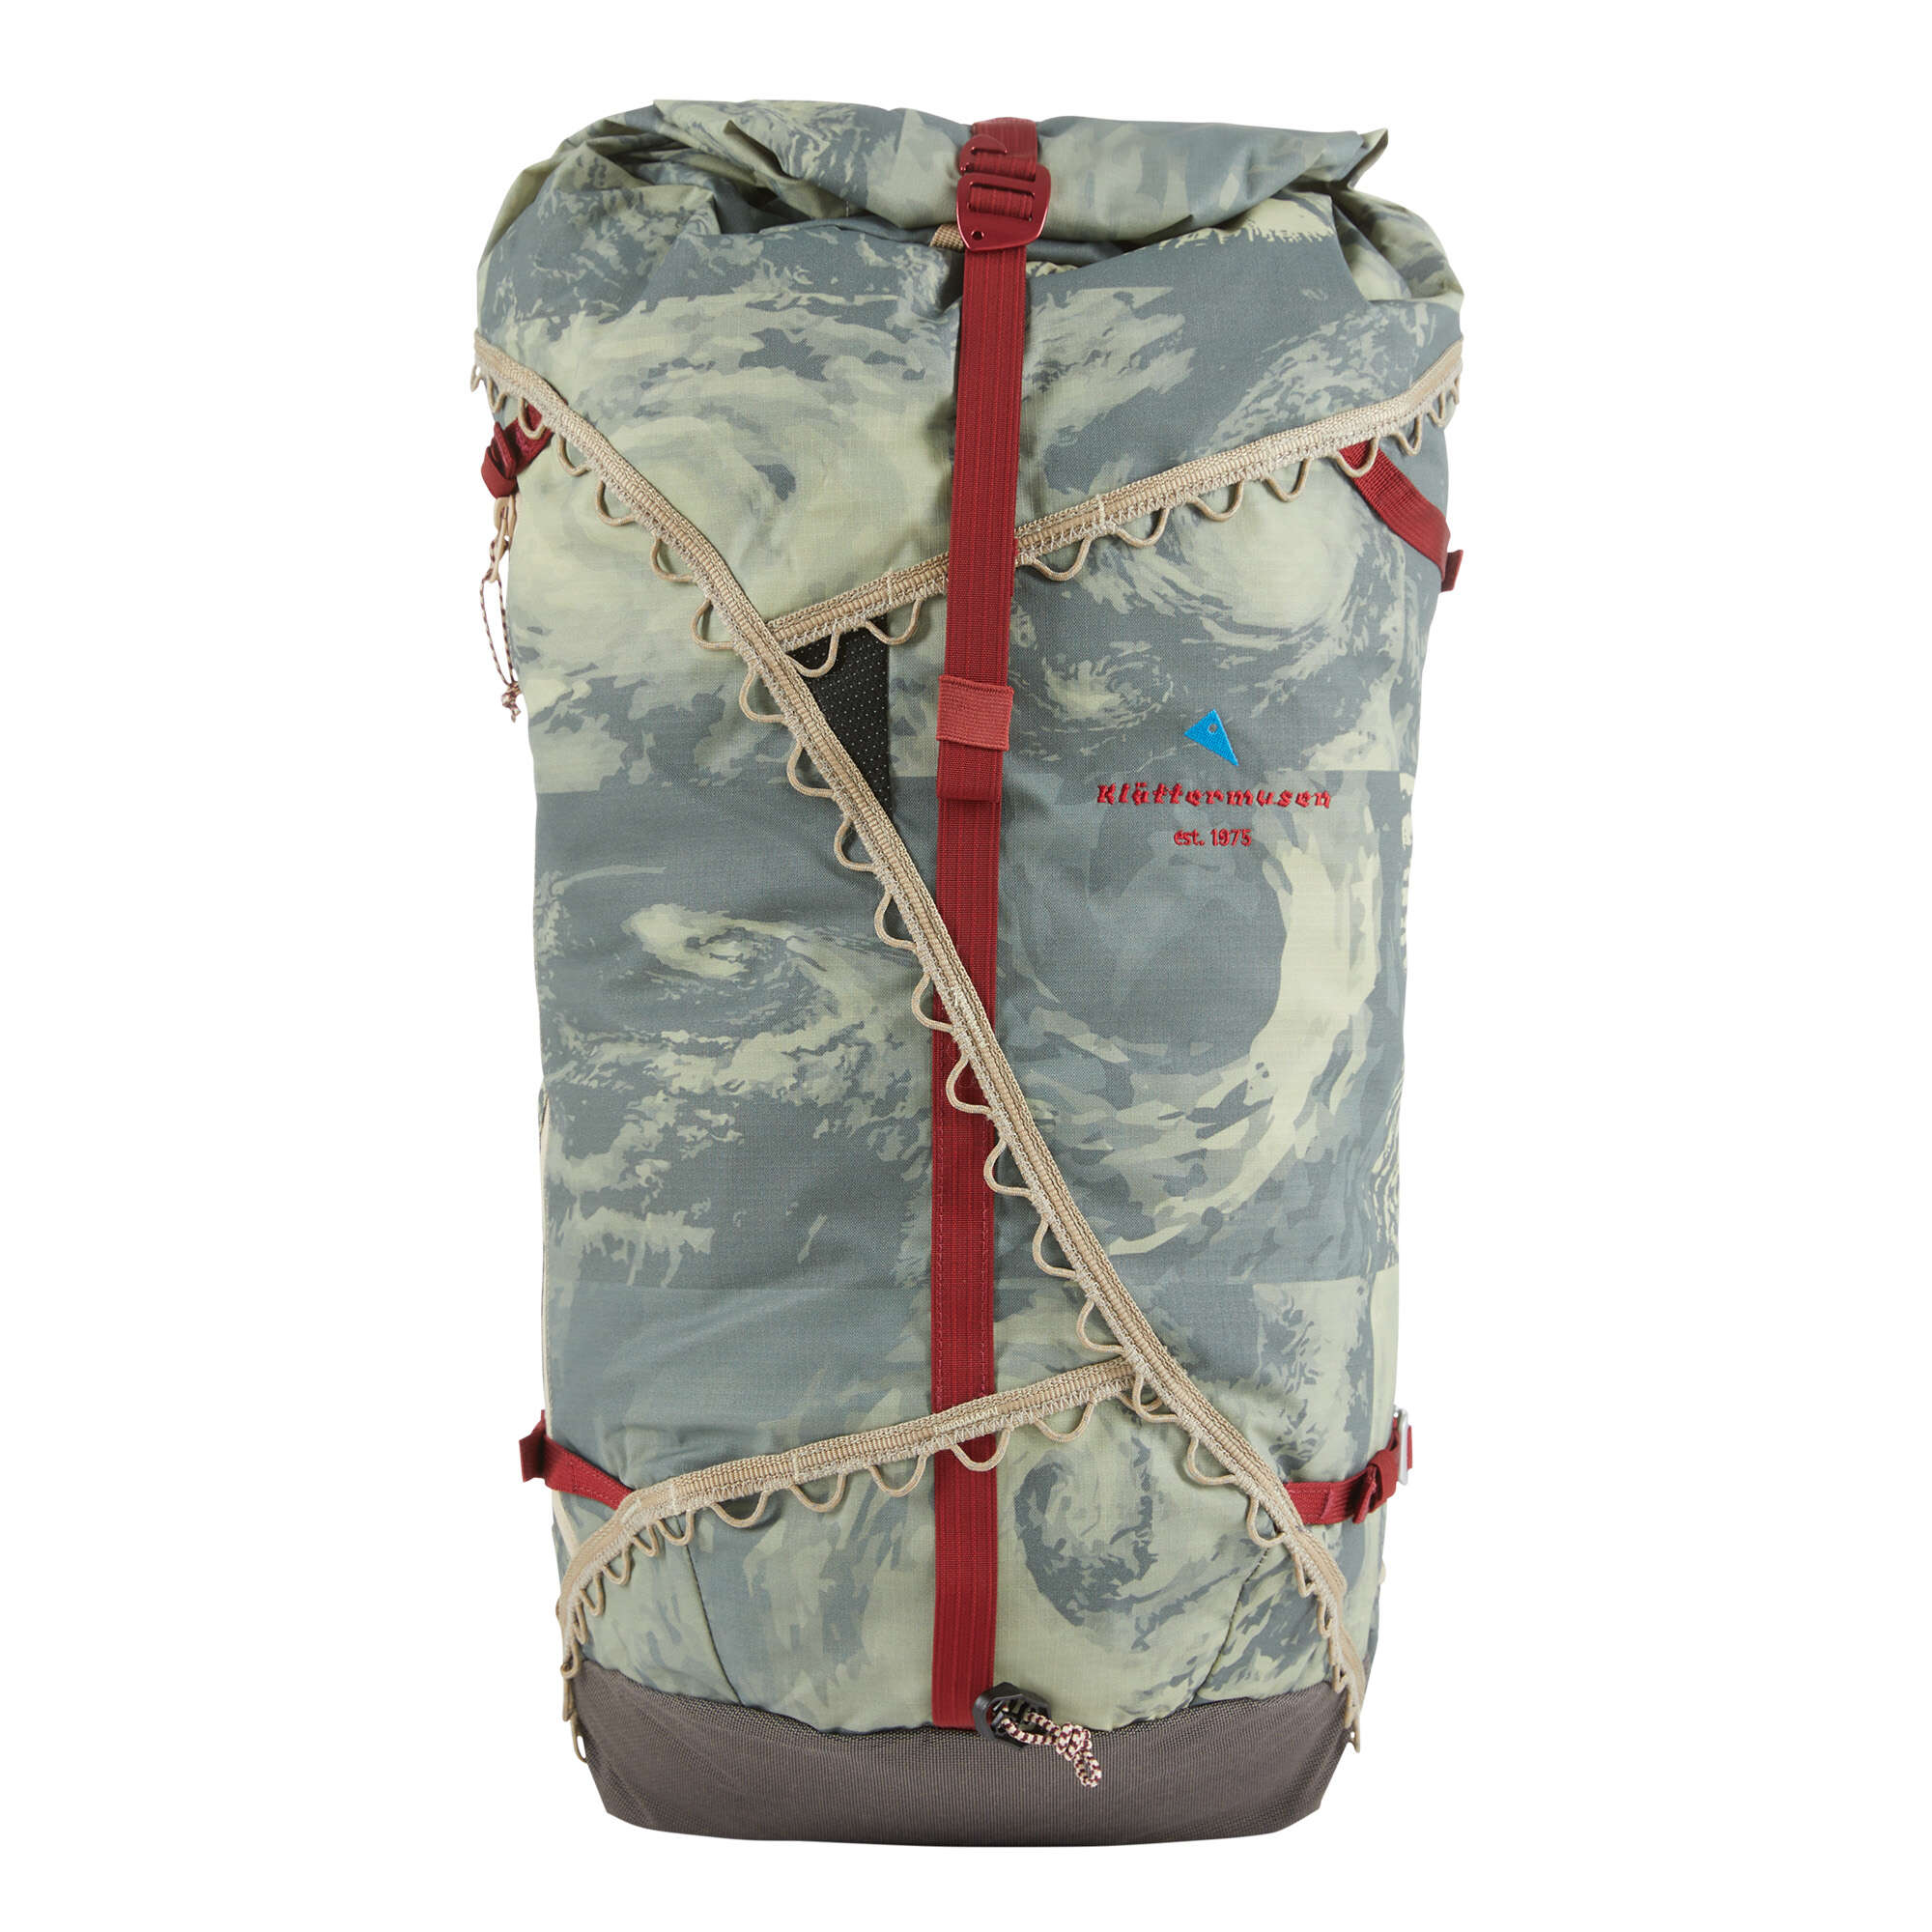 197 Retina Mountain Backpack - Ull Limited Edition